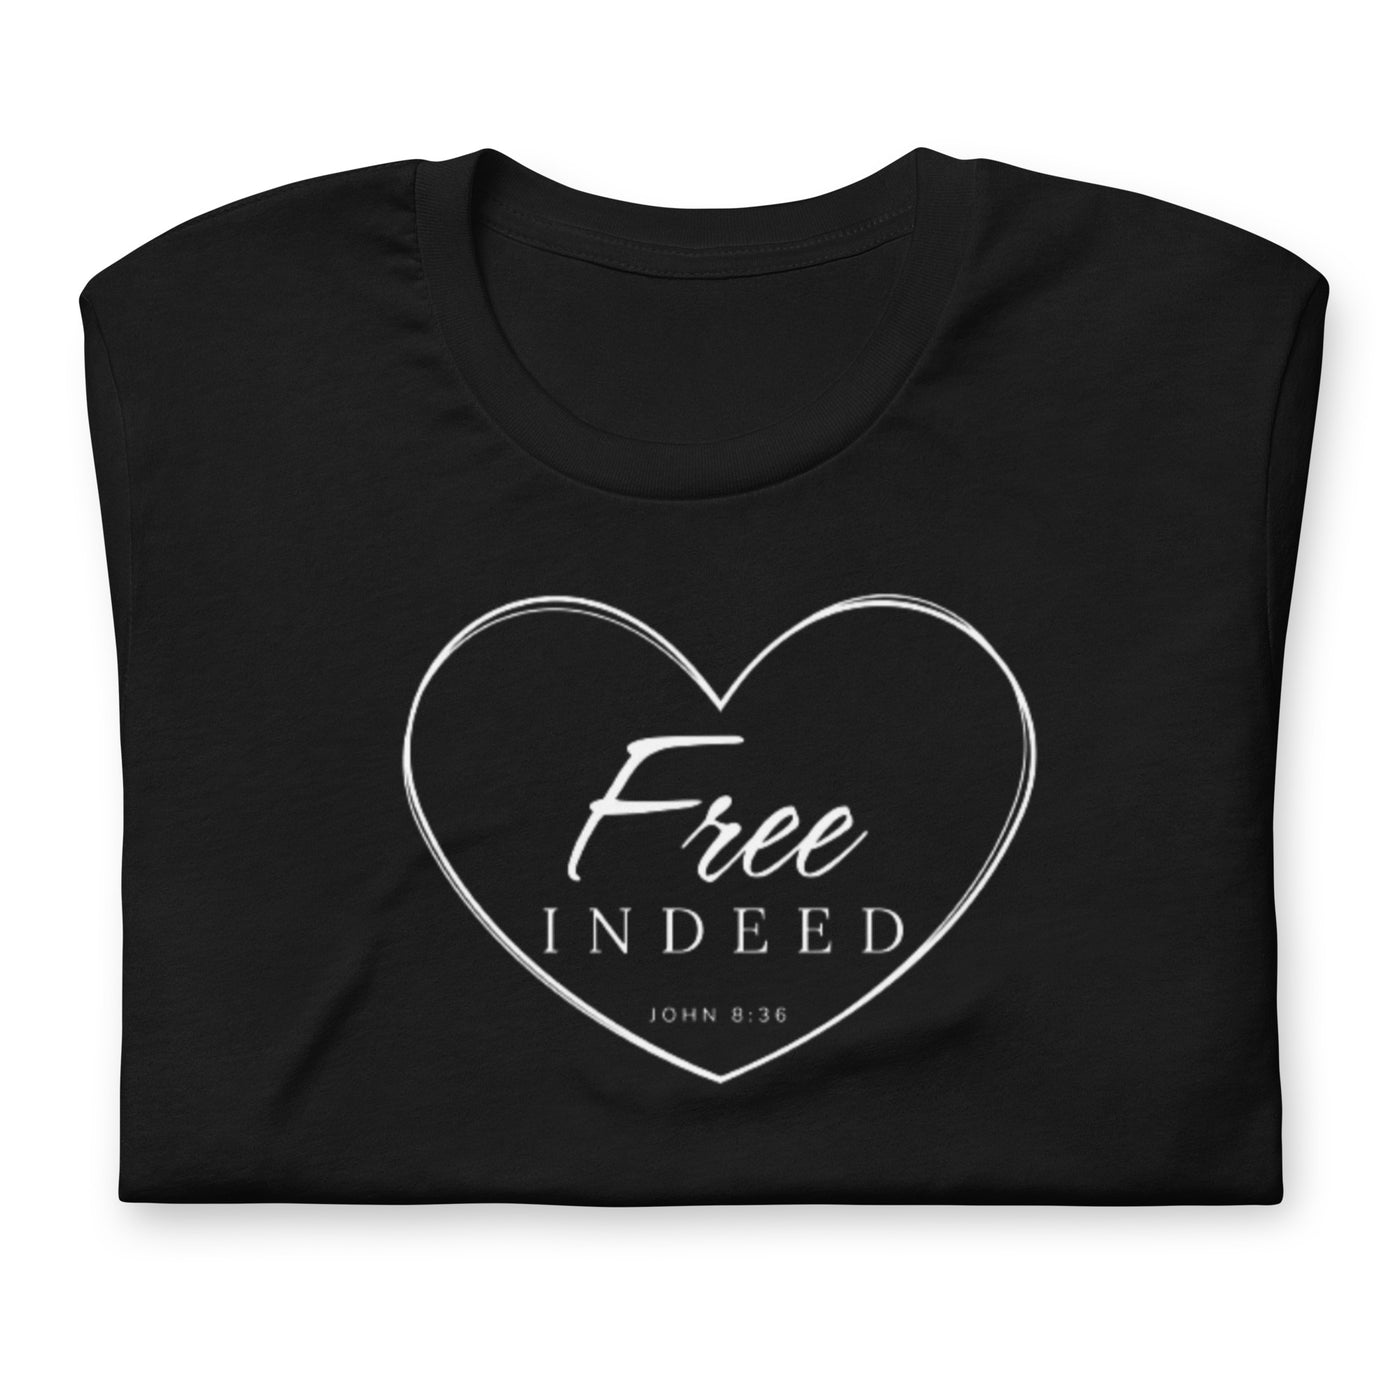 F&H Christian Free Indeed in My Heart Women's T-Shirt - Faith and Happiness Store